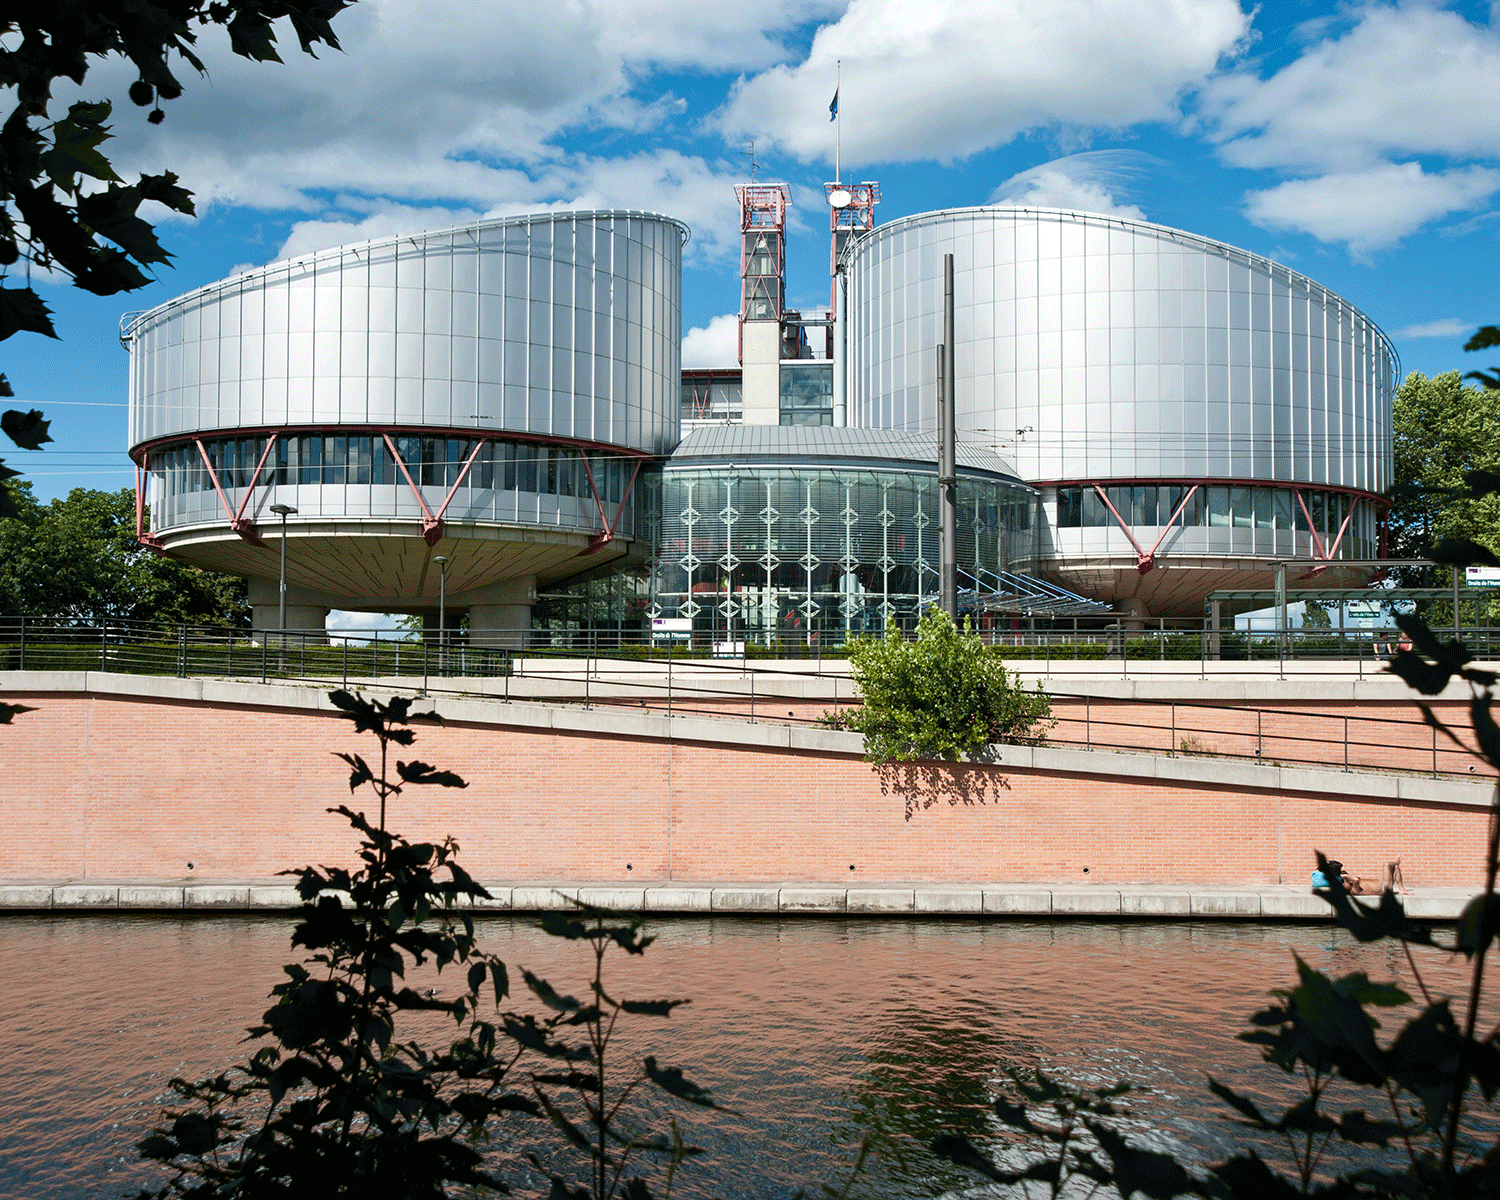 The European Court of Human Rights in Strasbourg, France, opened in 1959